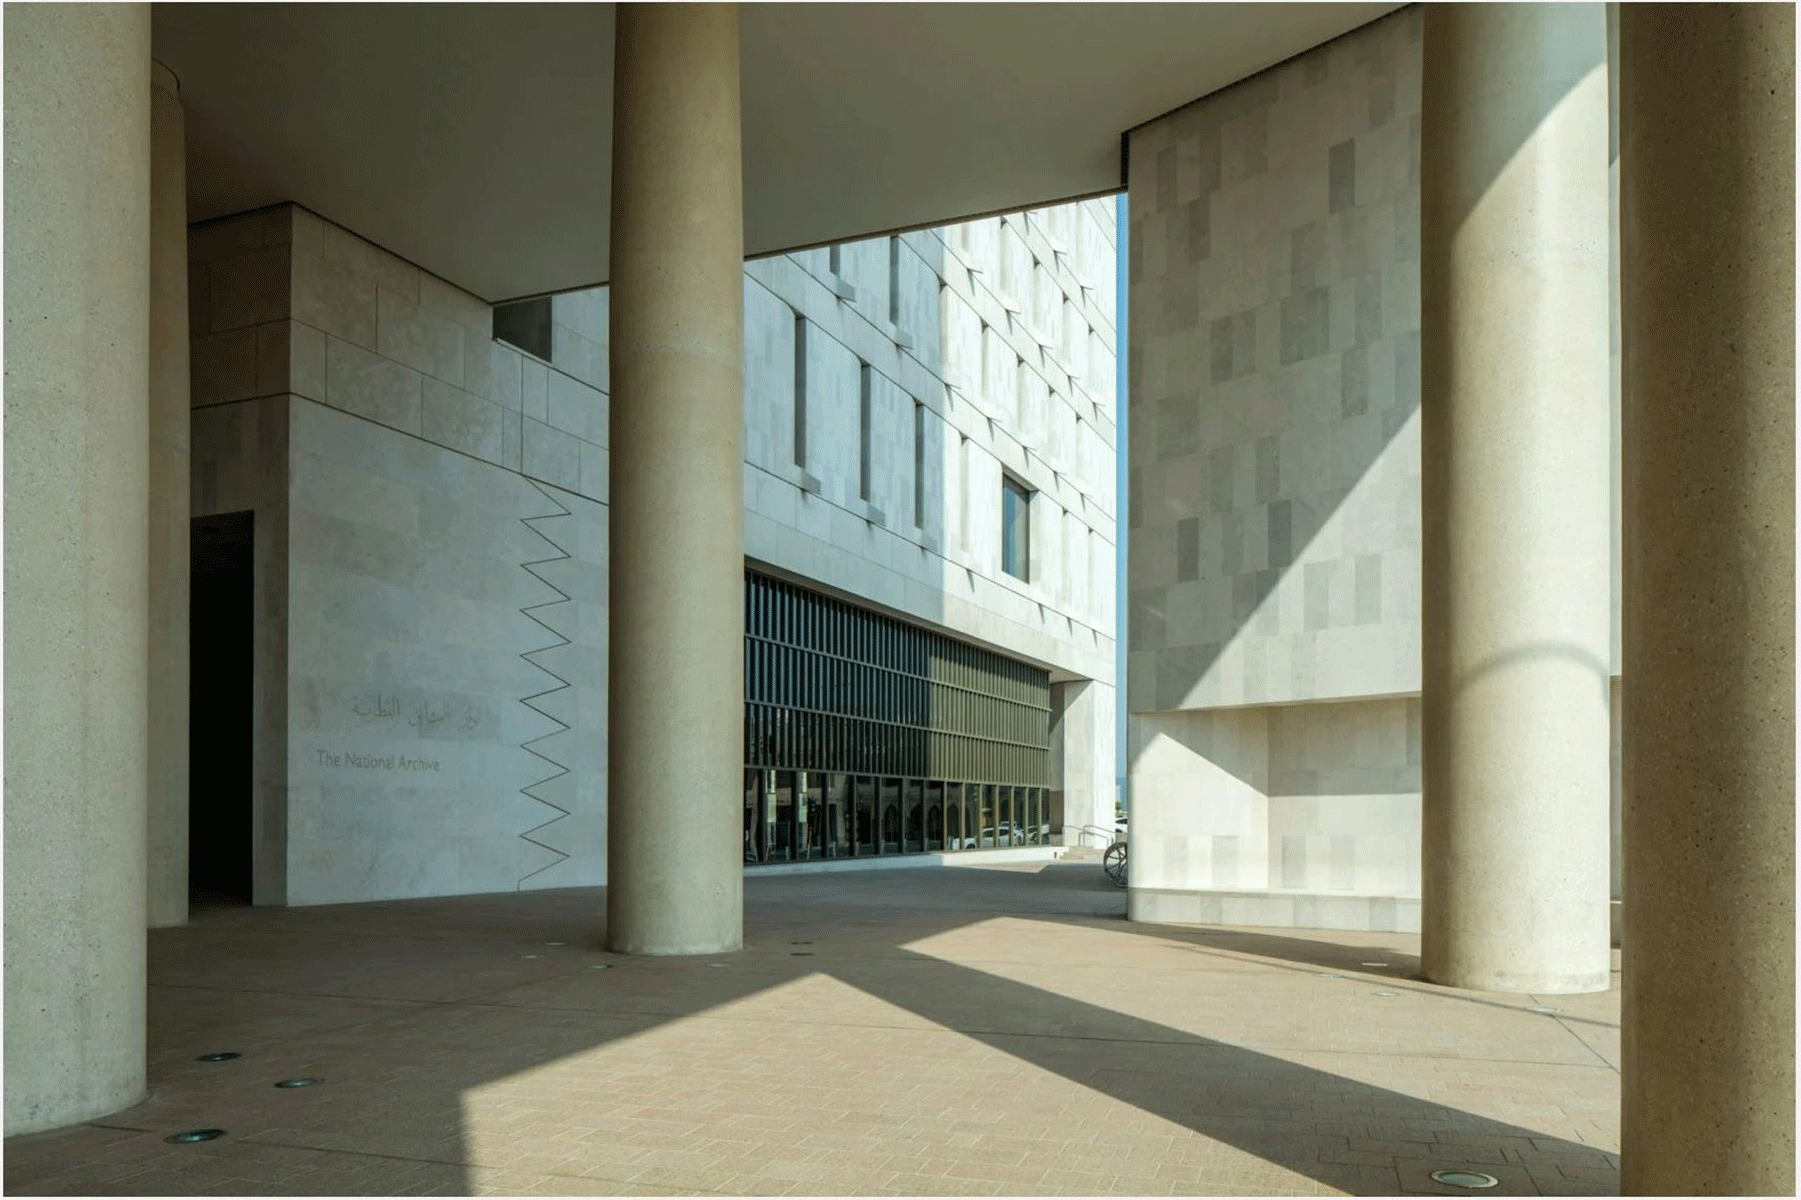 Qatar National Archive Building 04